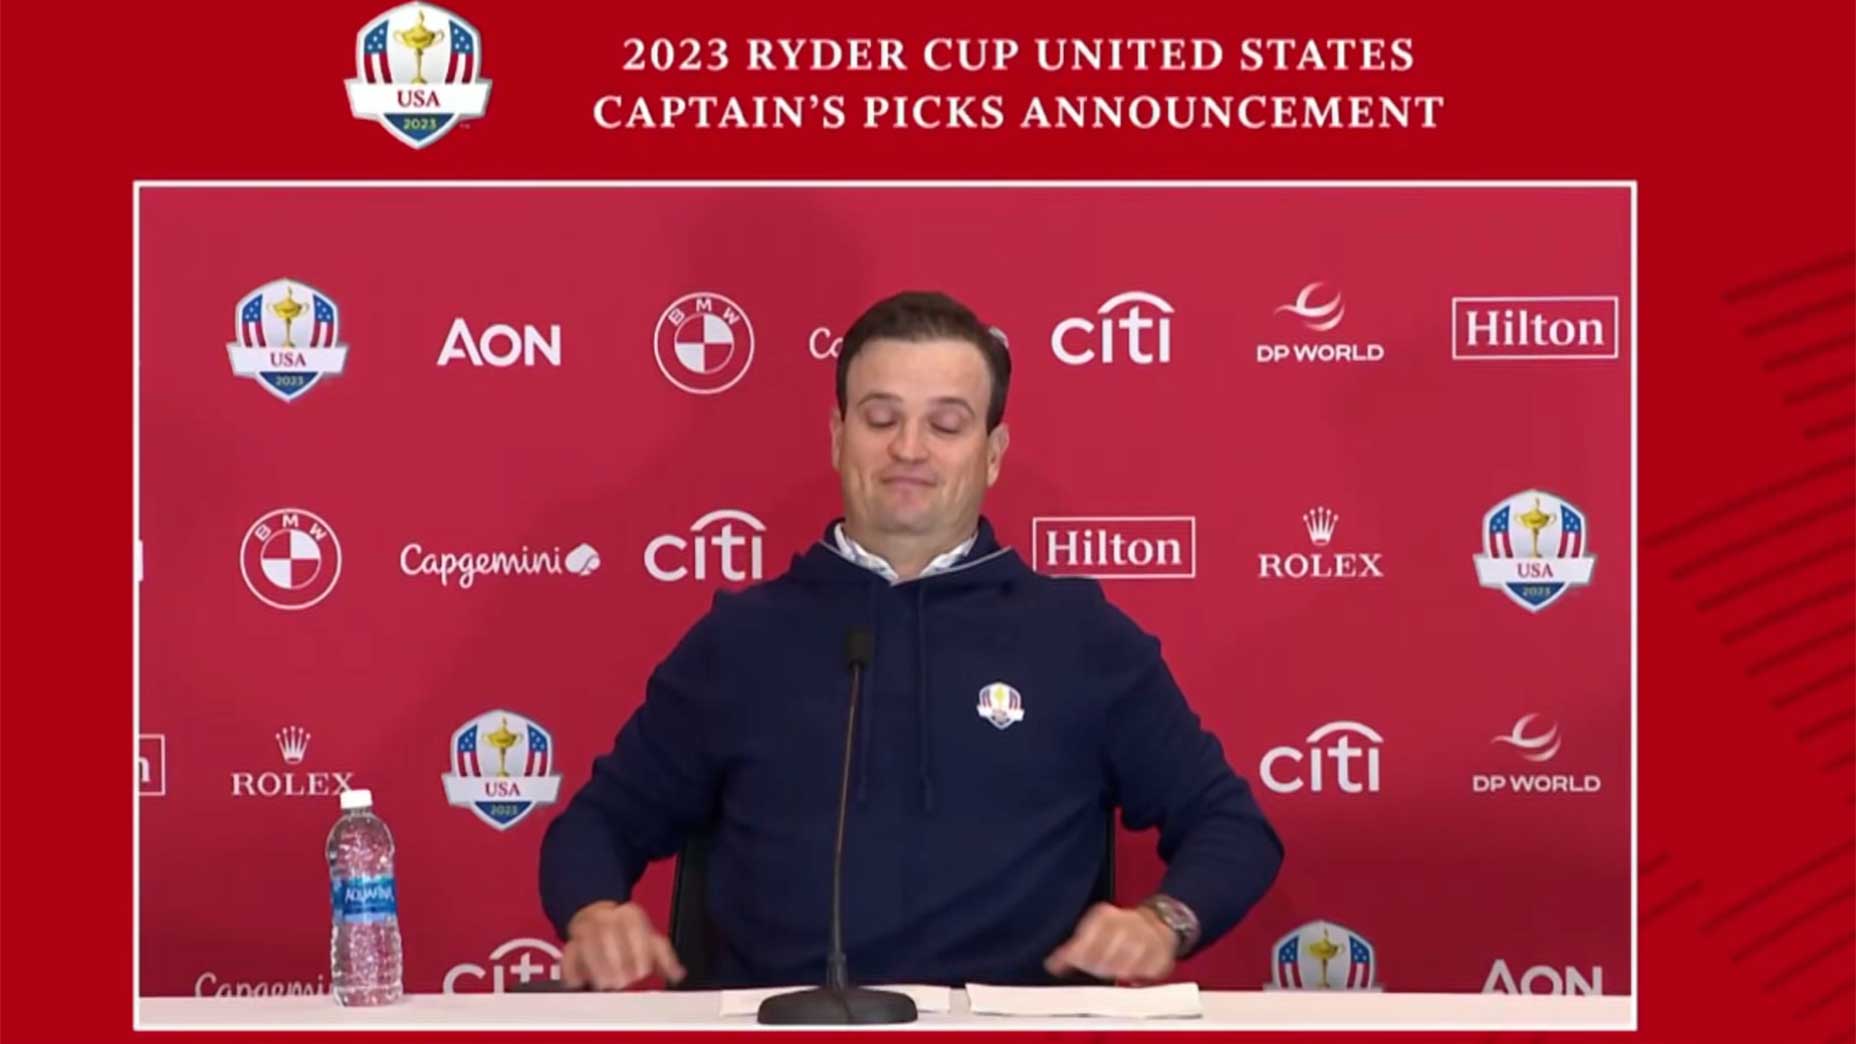 Zach Johnson Gets Emotional during Ryder Cup Press Conference